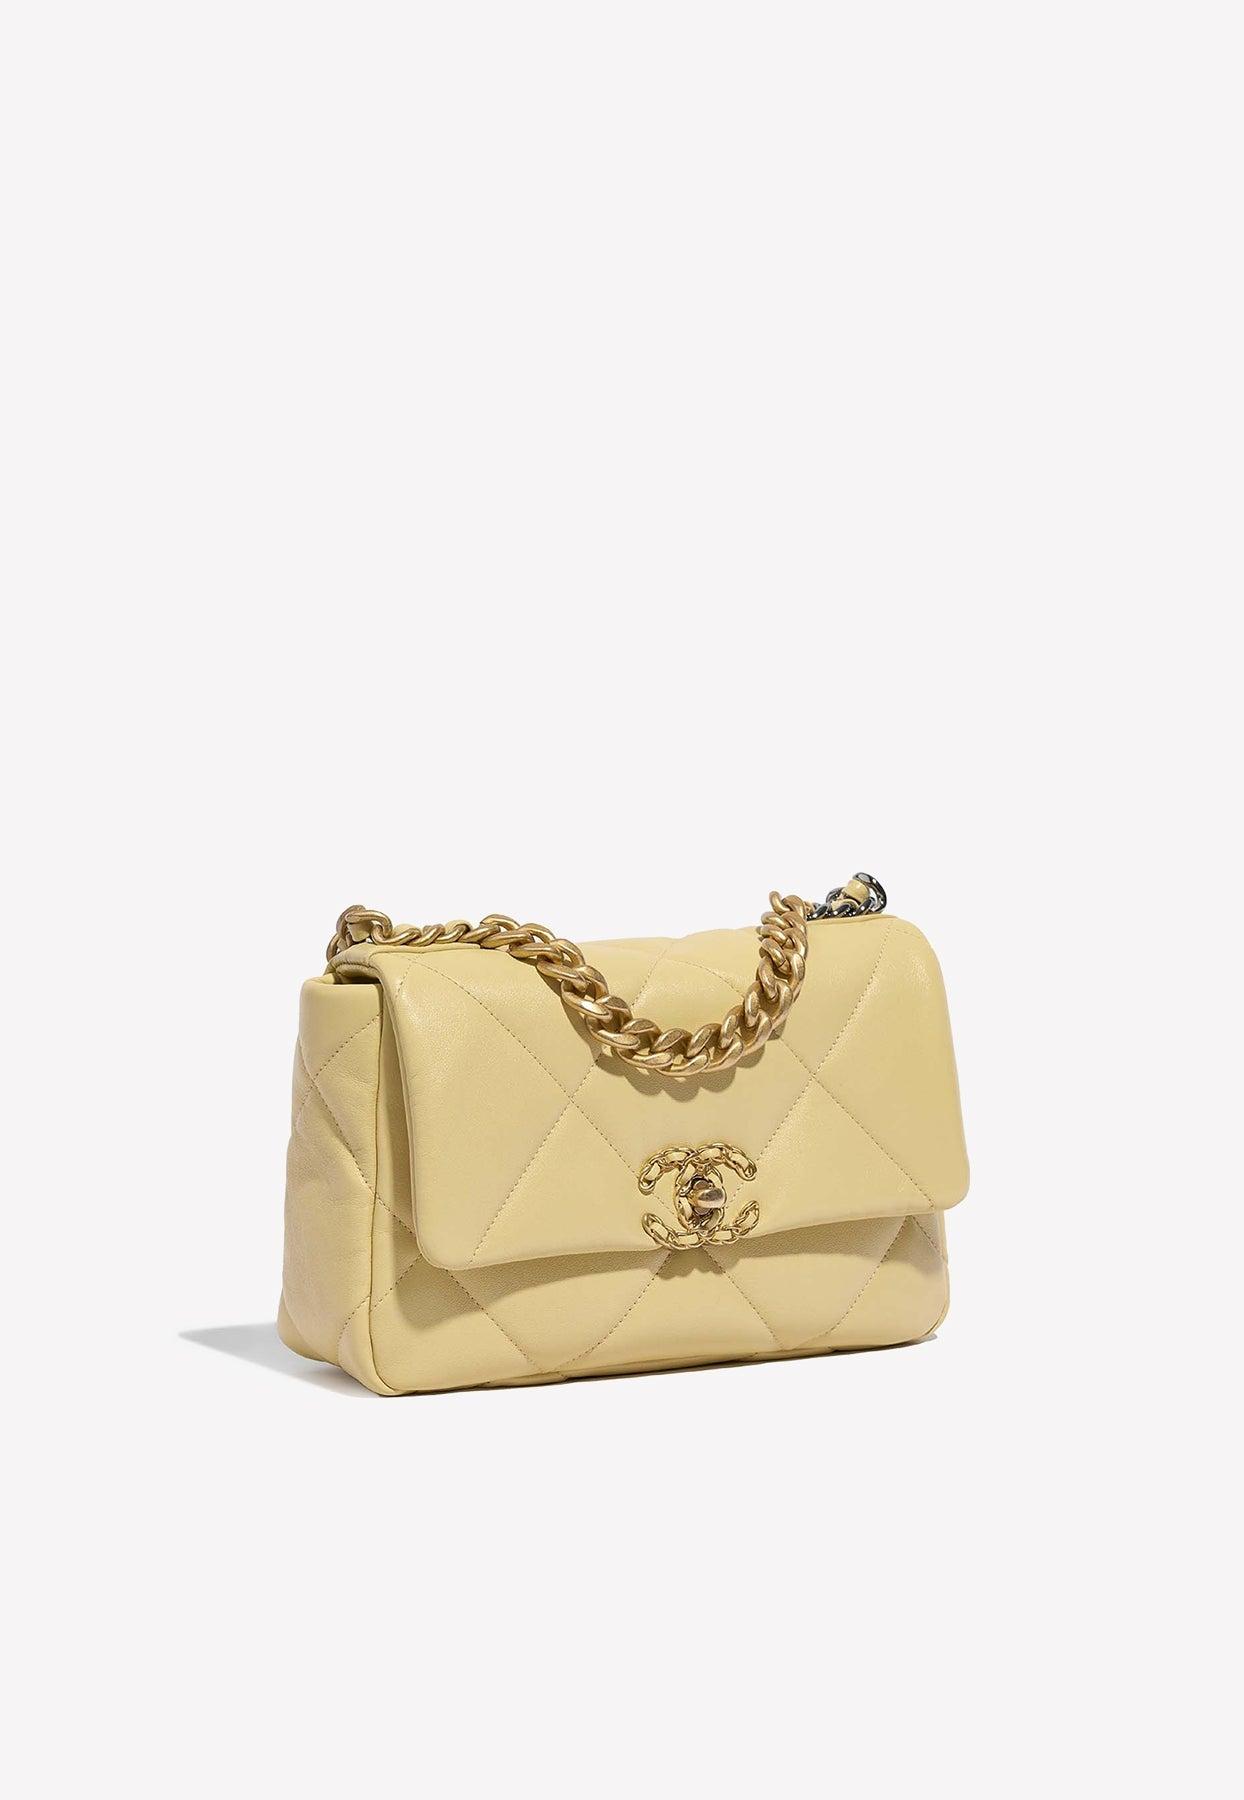 CHANEL Lambskin Quilted Medium Chanel 19 Flap Yellow 1291545